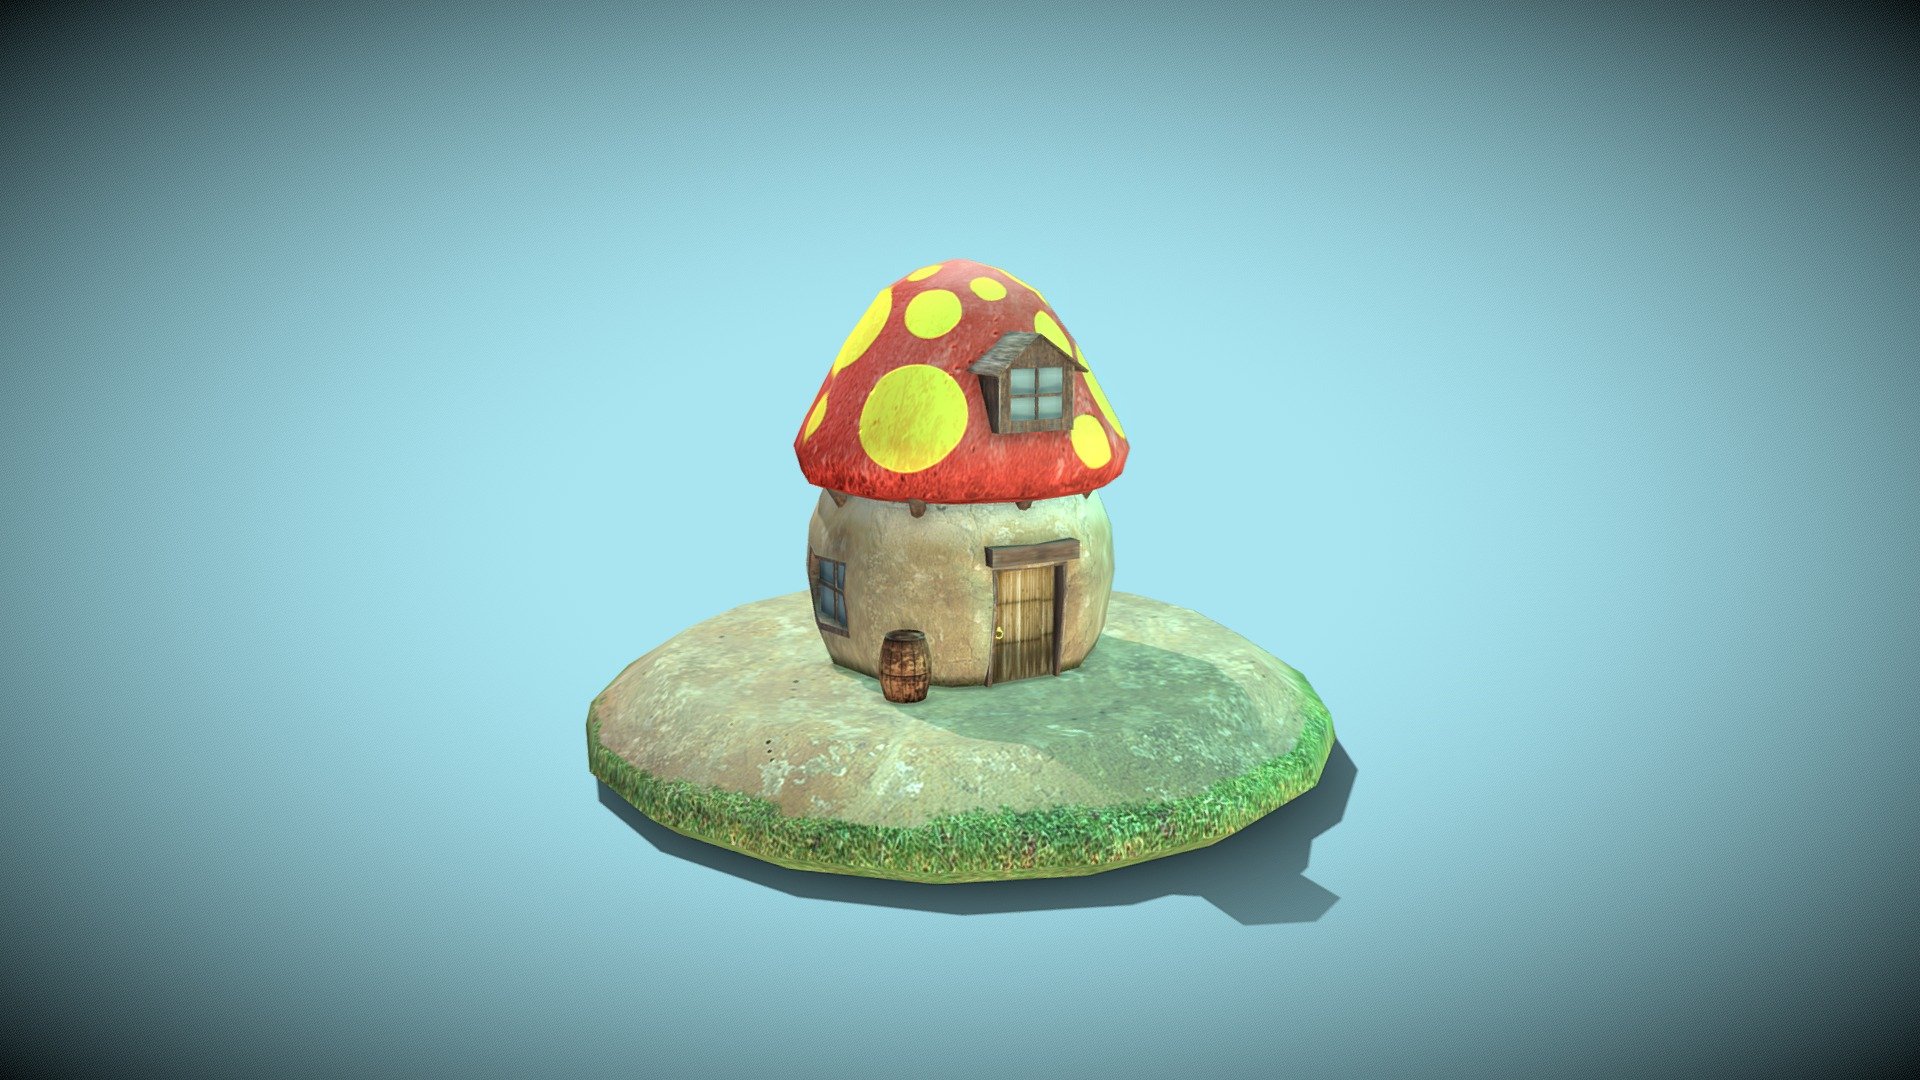 A low-poly mushroom house I did in the past for a quick model challenge I completed in 4 hours with textures in my spare time for fun. You can get it for free, it isn't a detailed model, but it might be helpful for a far-scene shot.

Visit my Artstation profile to view this model's rendered version
https://www.artstation.com/artwork/QvGX3 - Mushroom House - Download Free 3D model by Ahmad Sawalha (@ahmad3d) 3d model